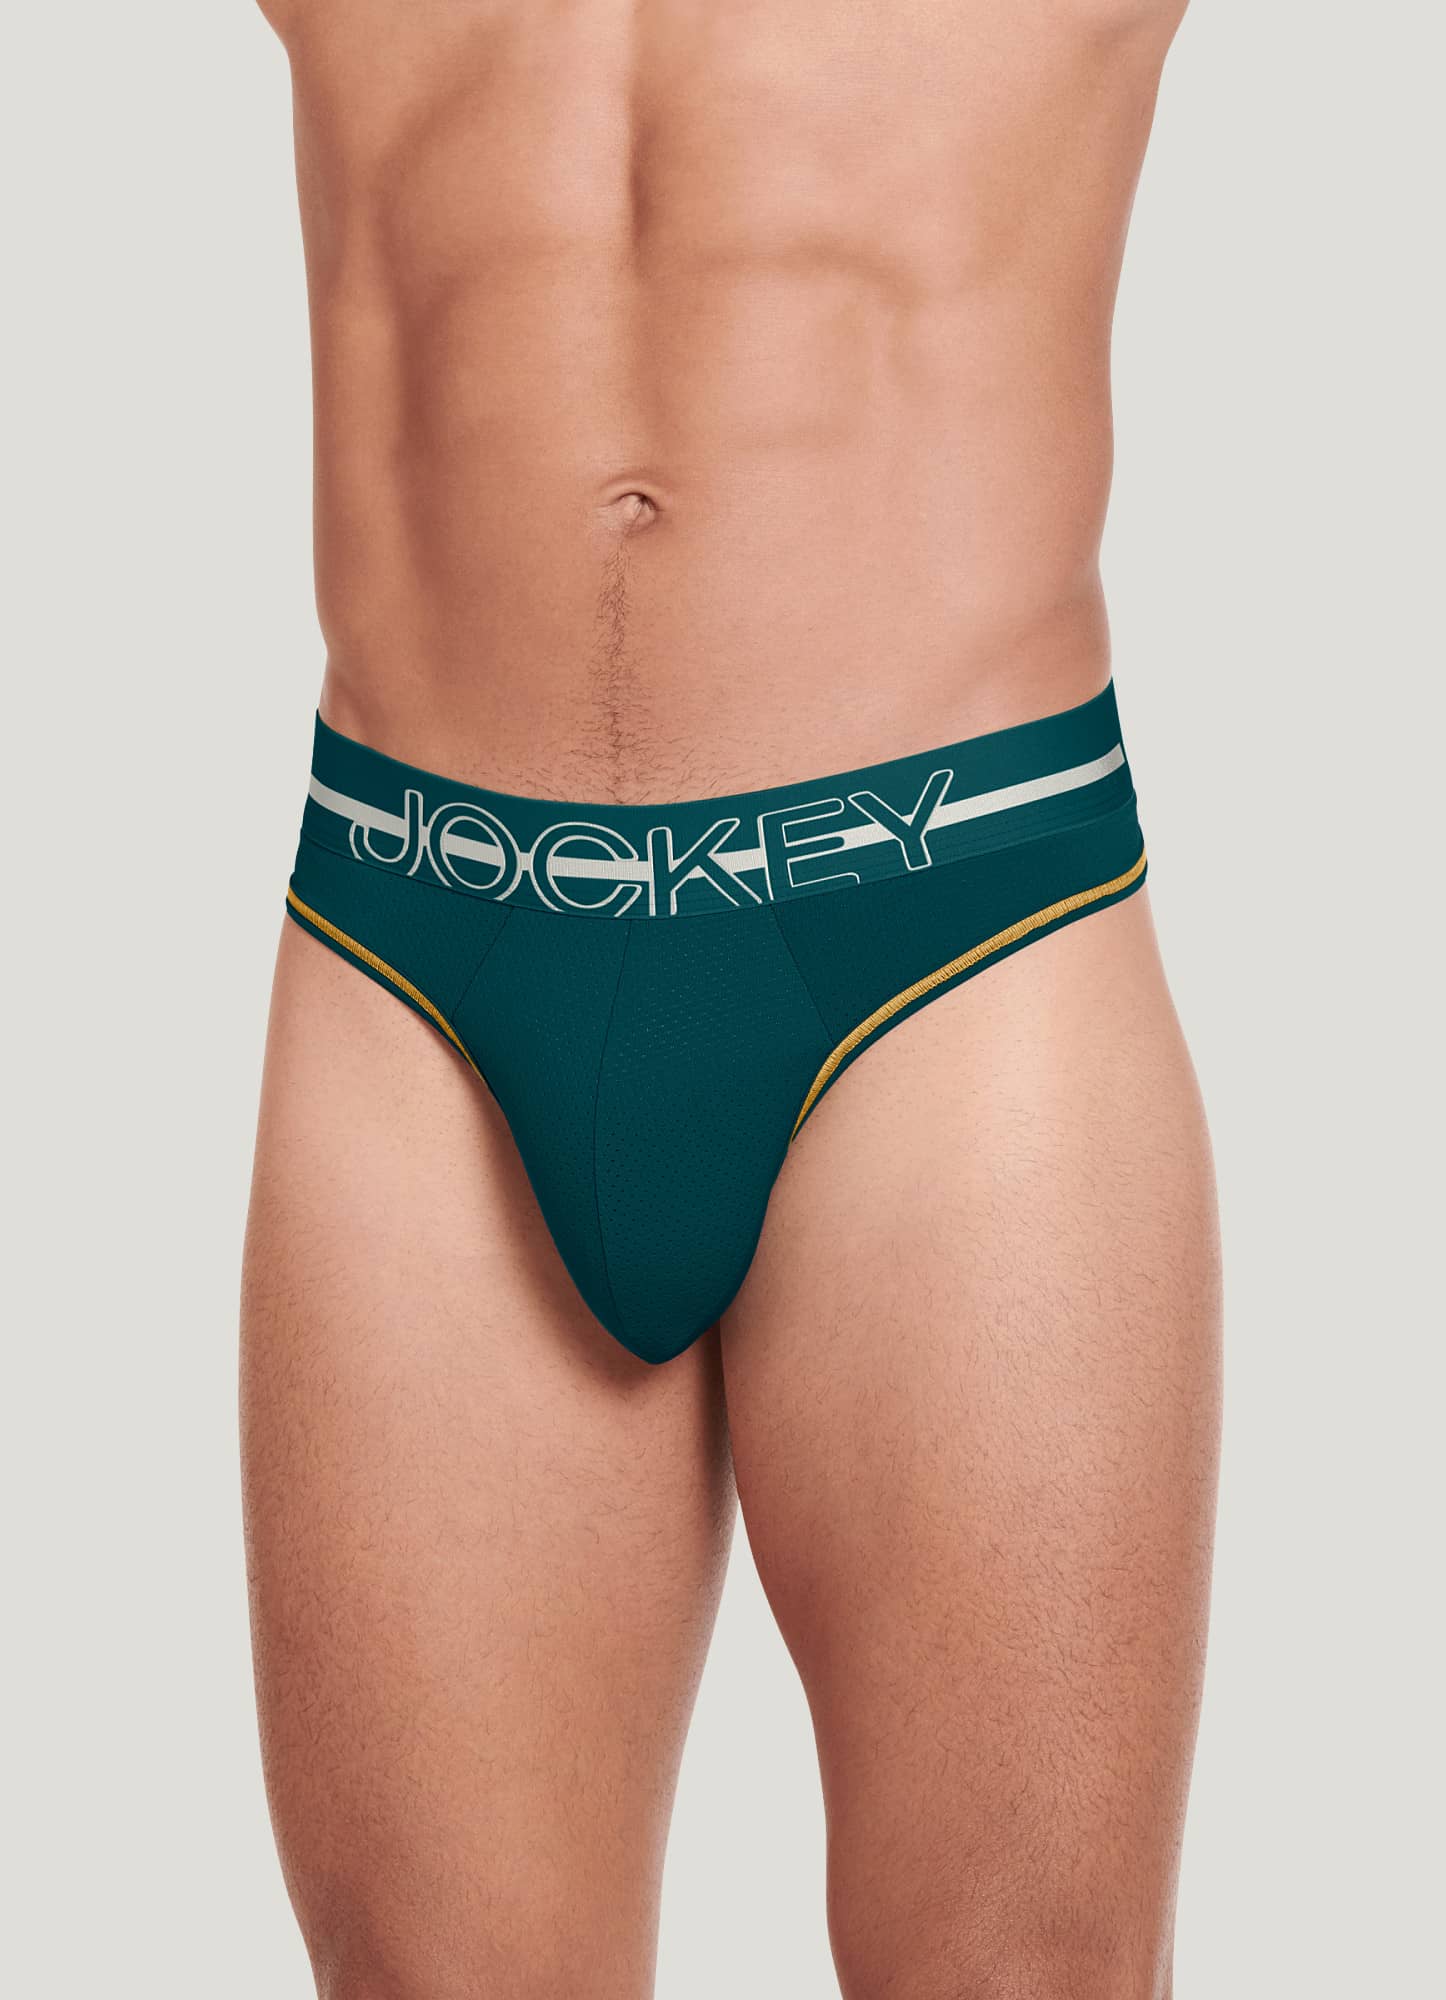 Men and Underwear on X: New arrivals and restock on all styles by